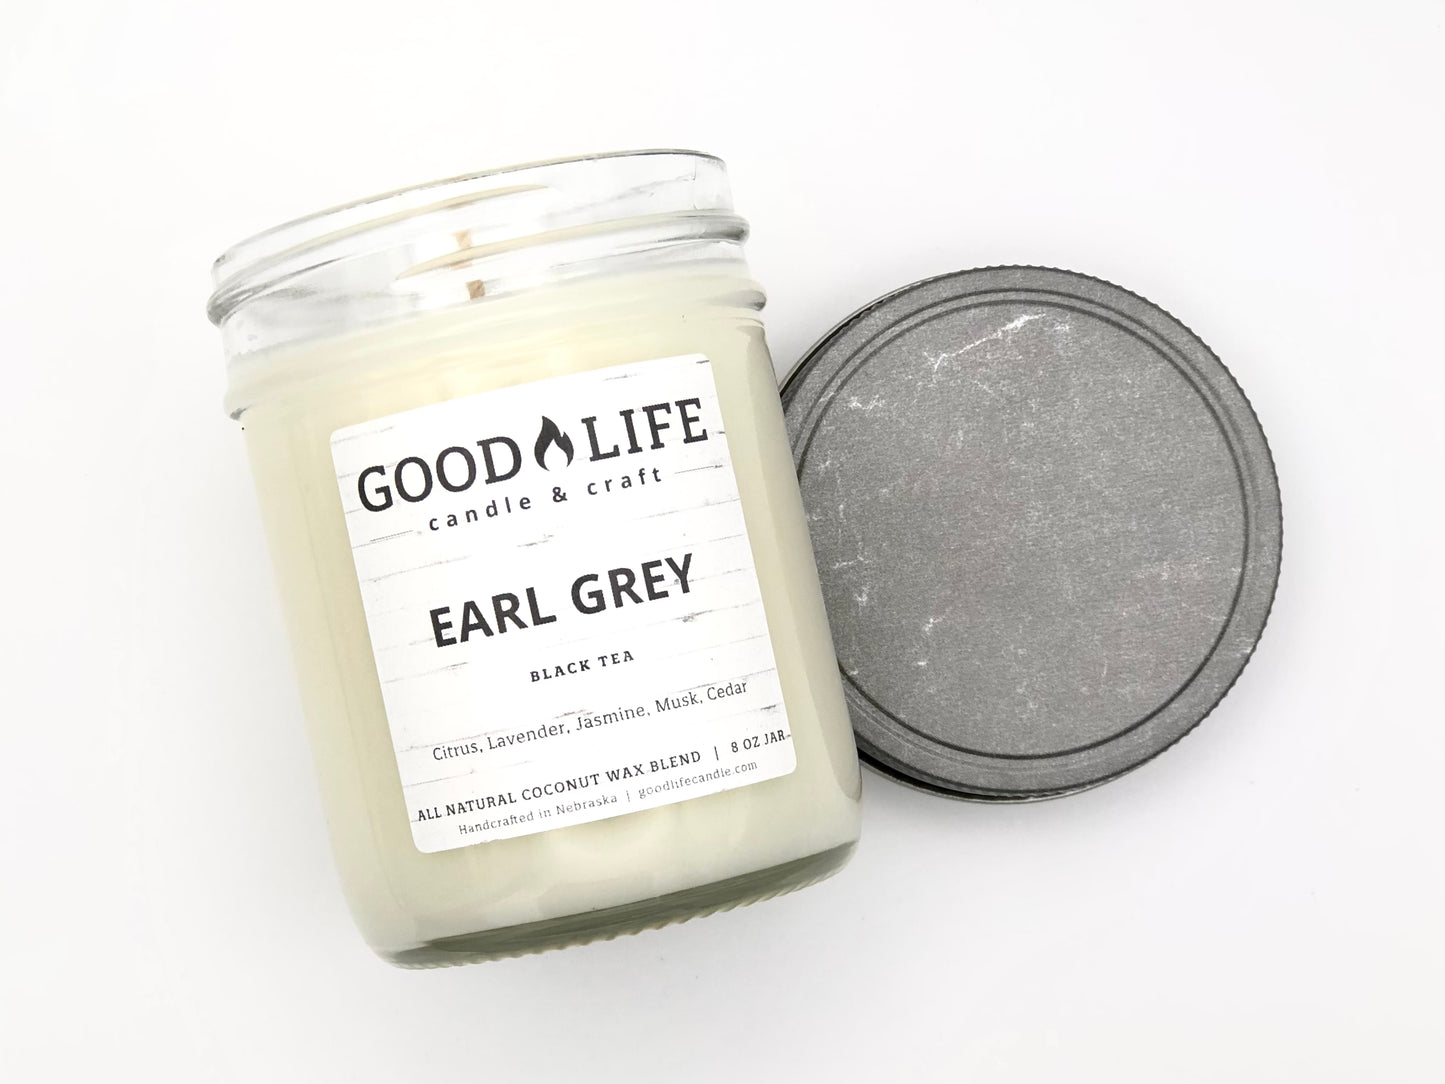 Earl Grey Black Tea Scented Candle